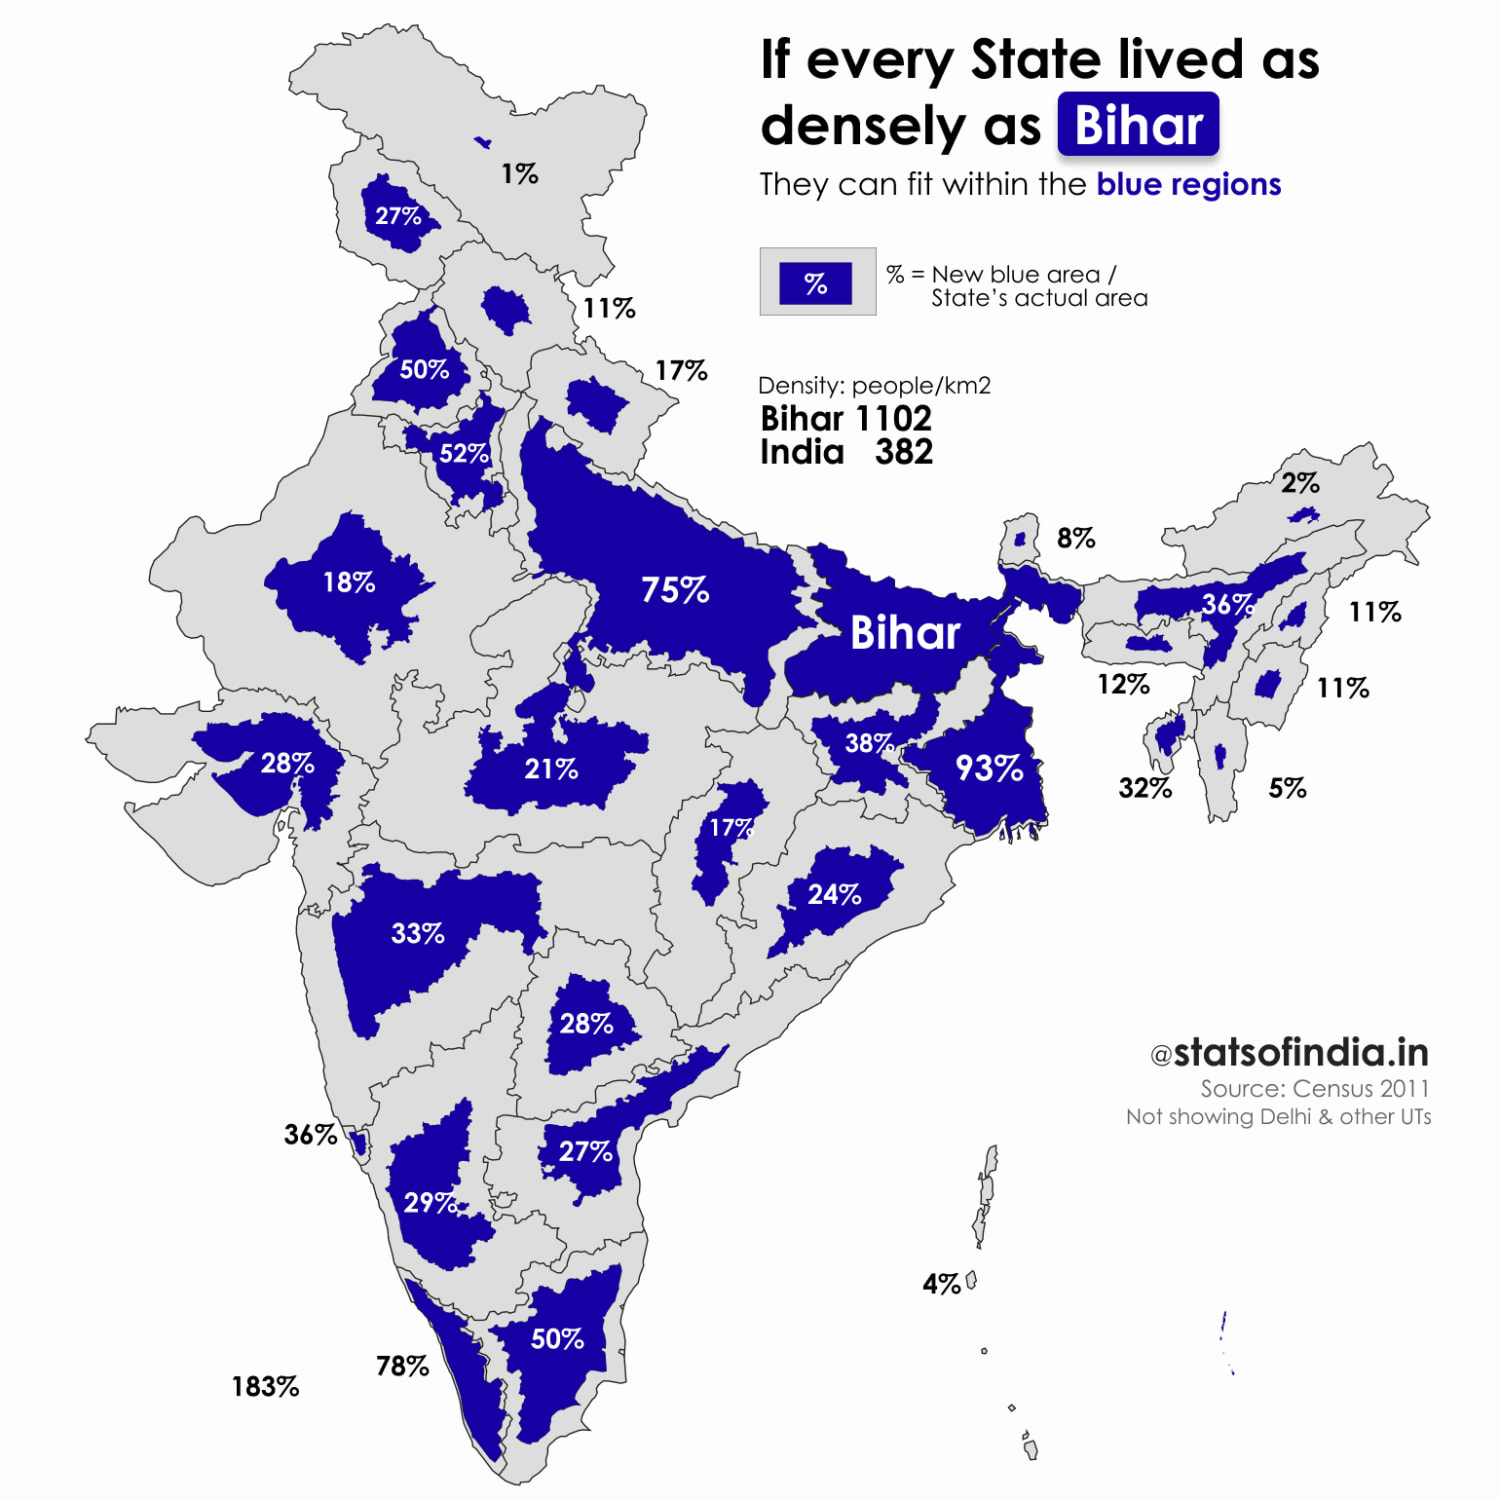 If every State in India lived as densely as Bihar – they can fit within the blue regions